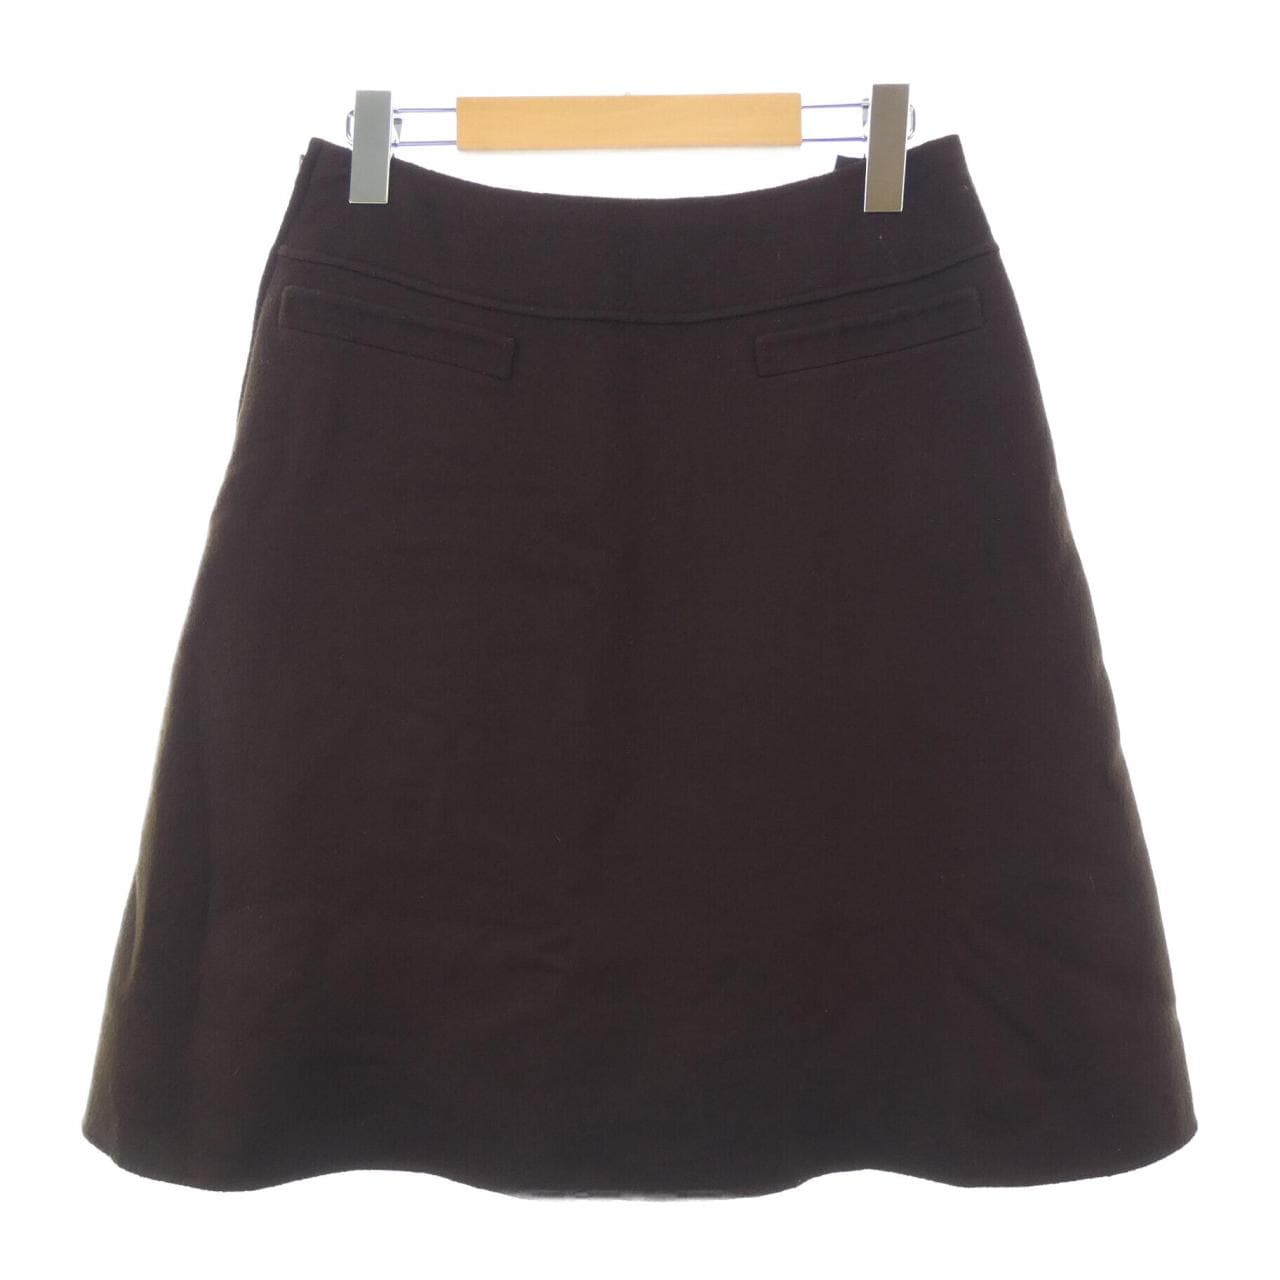 FOXEY BOUTIQUE Skirt